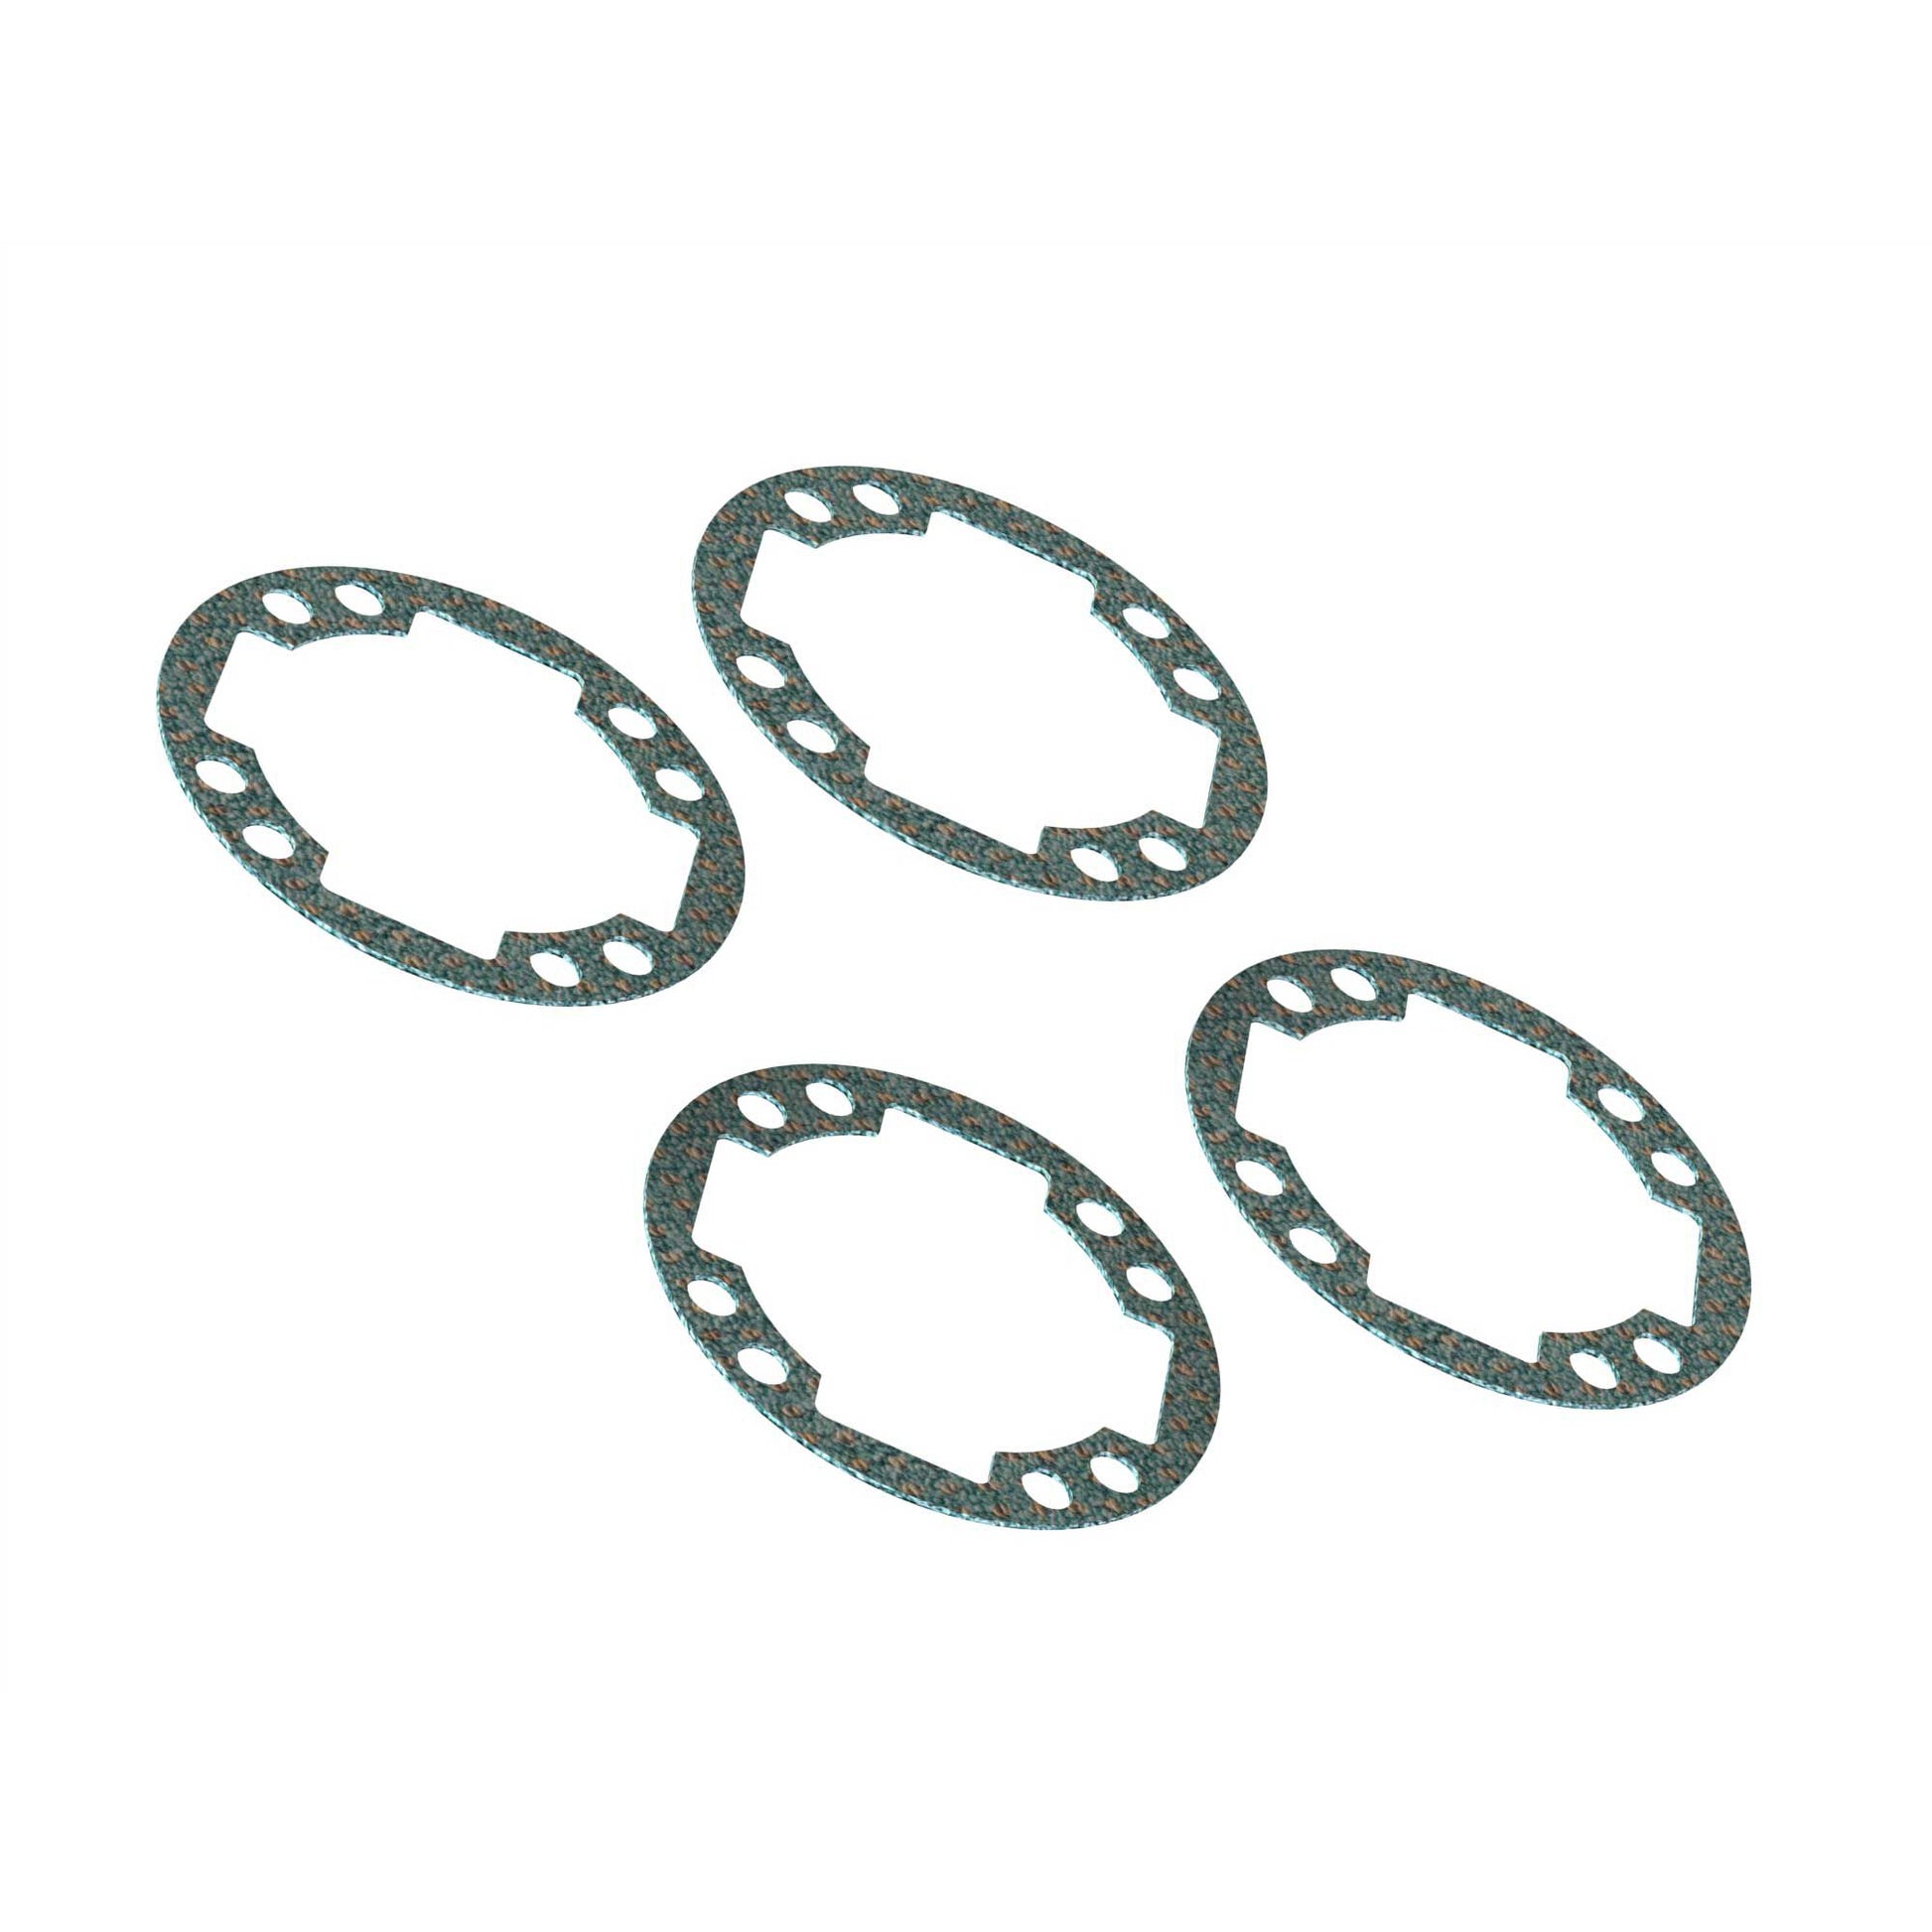 Gasket (4) - Dirt Cheap RC SAVING YOU MONEY, ONE PART AT A TIME